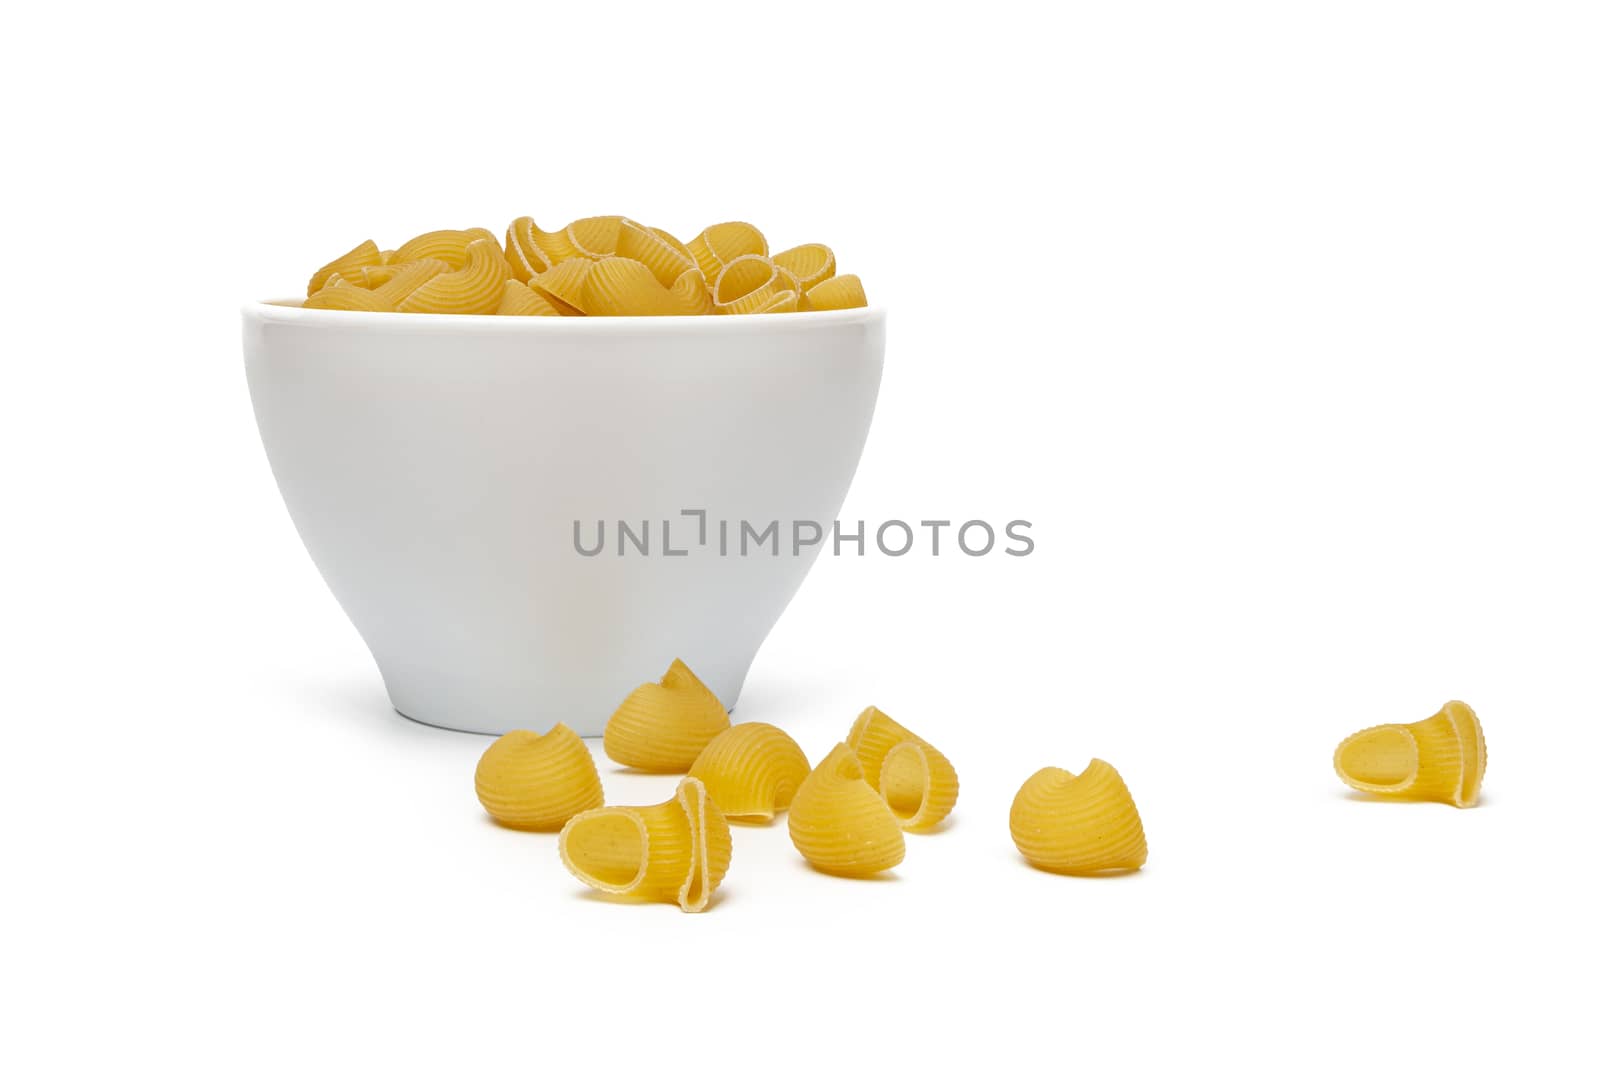 Pasta Pipe Rigate in a white bowl. Isolated on a white background